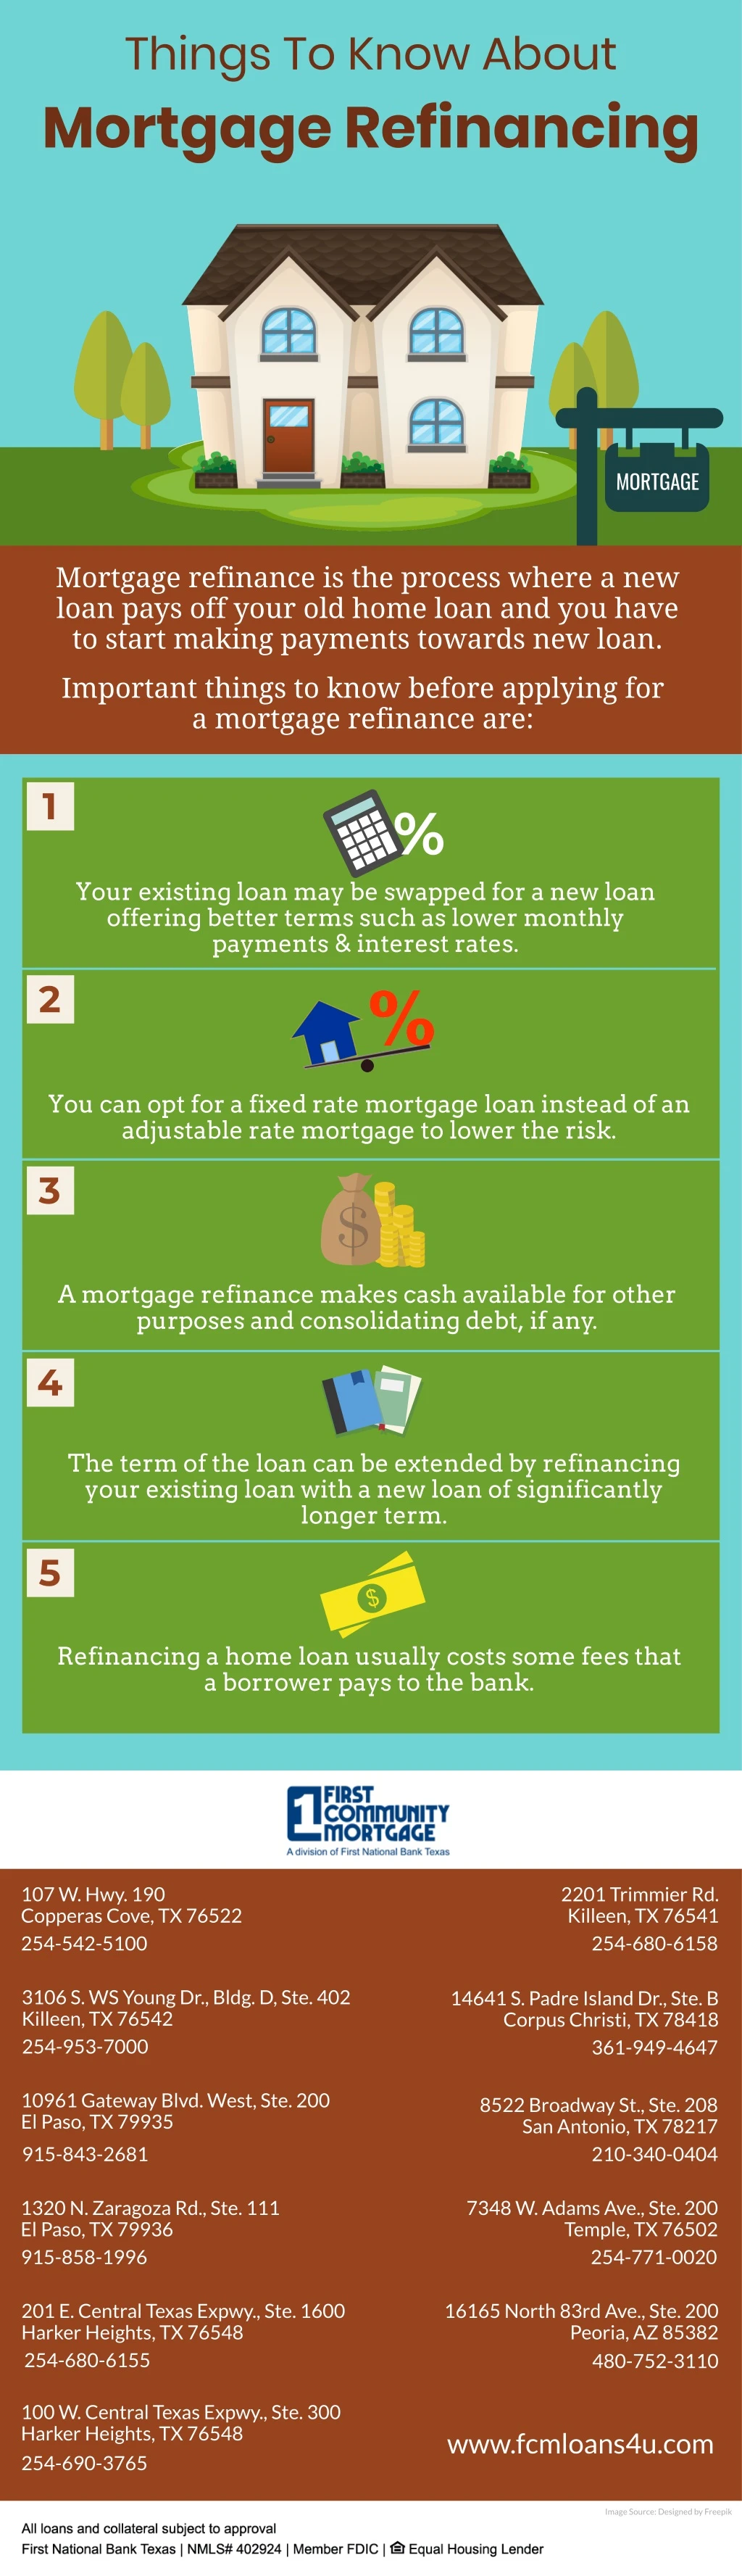 things to know about mortgage refinancing